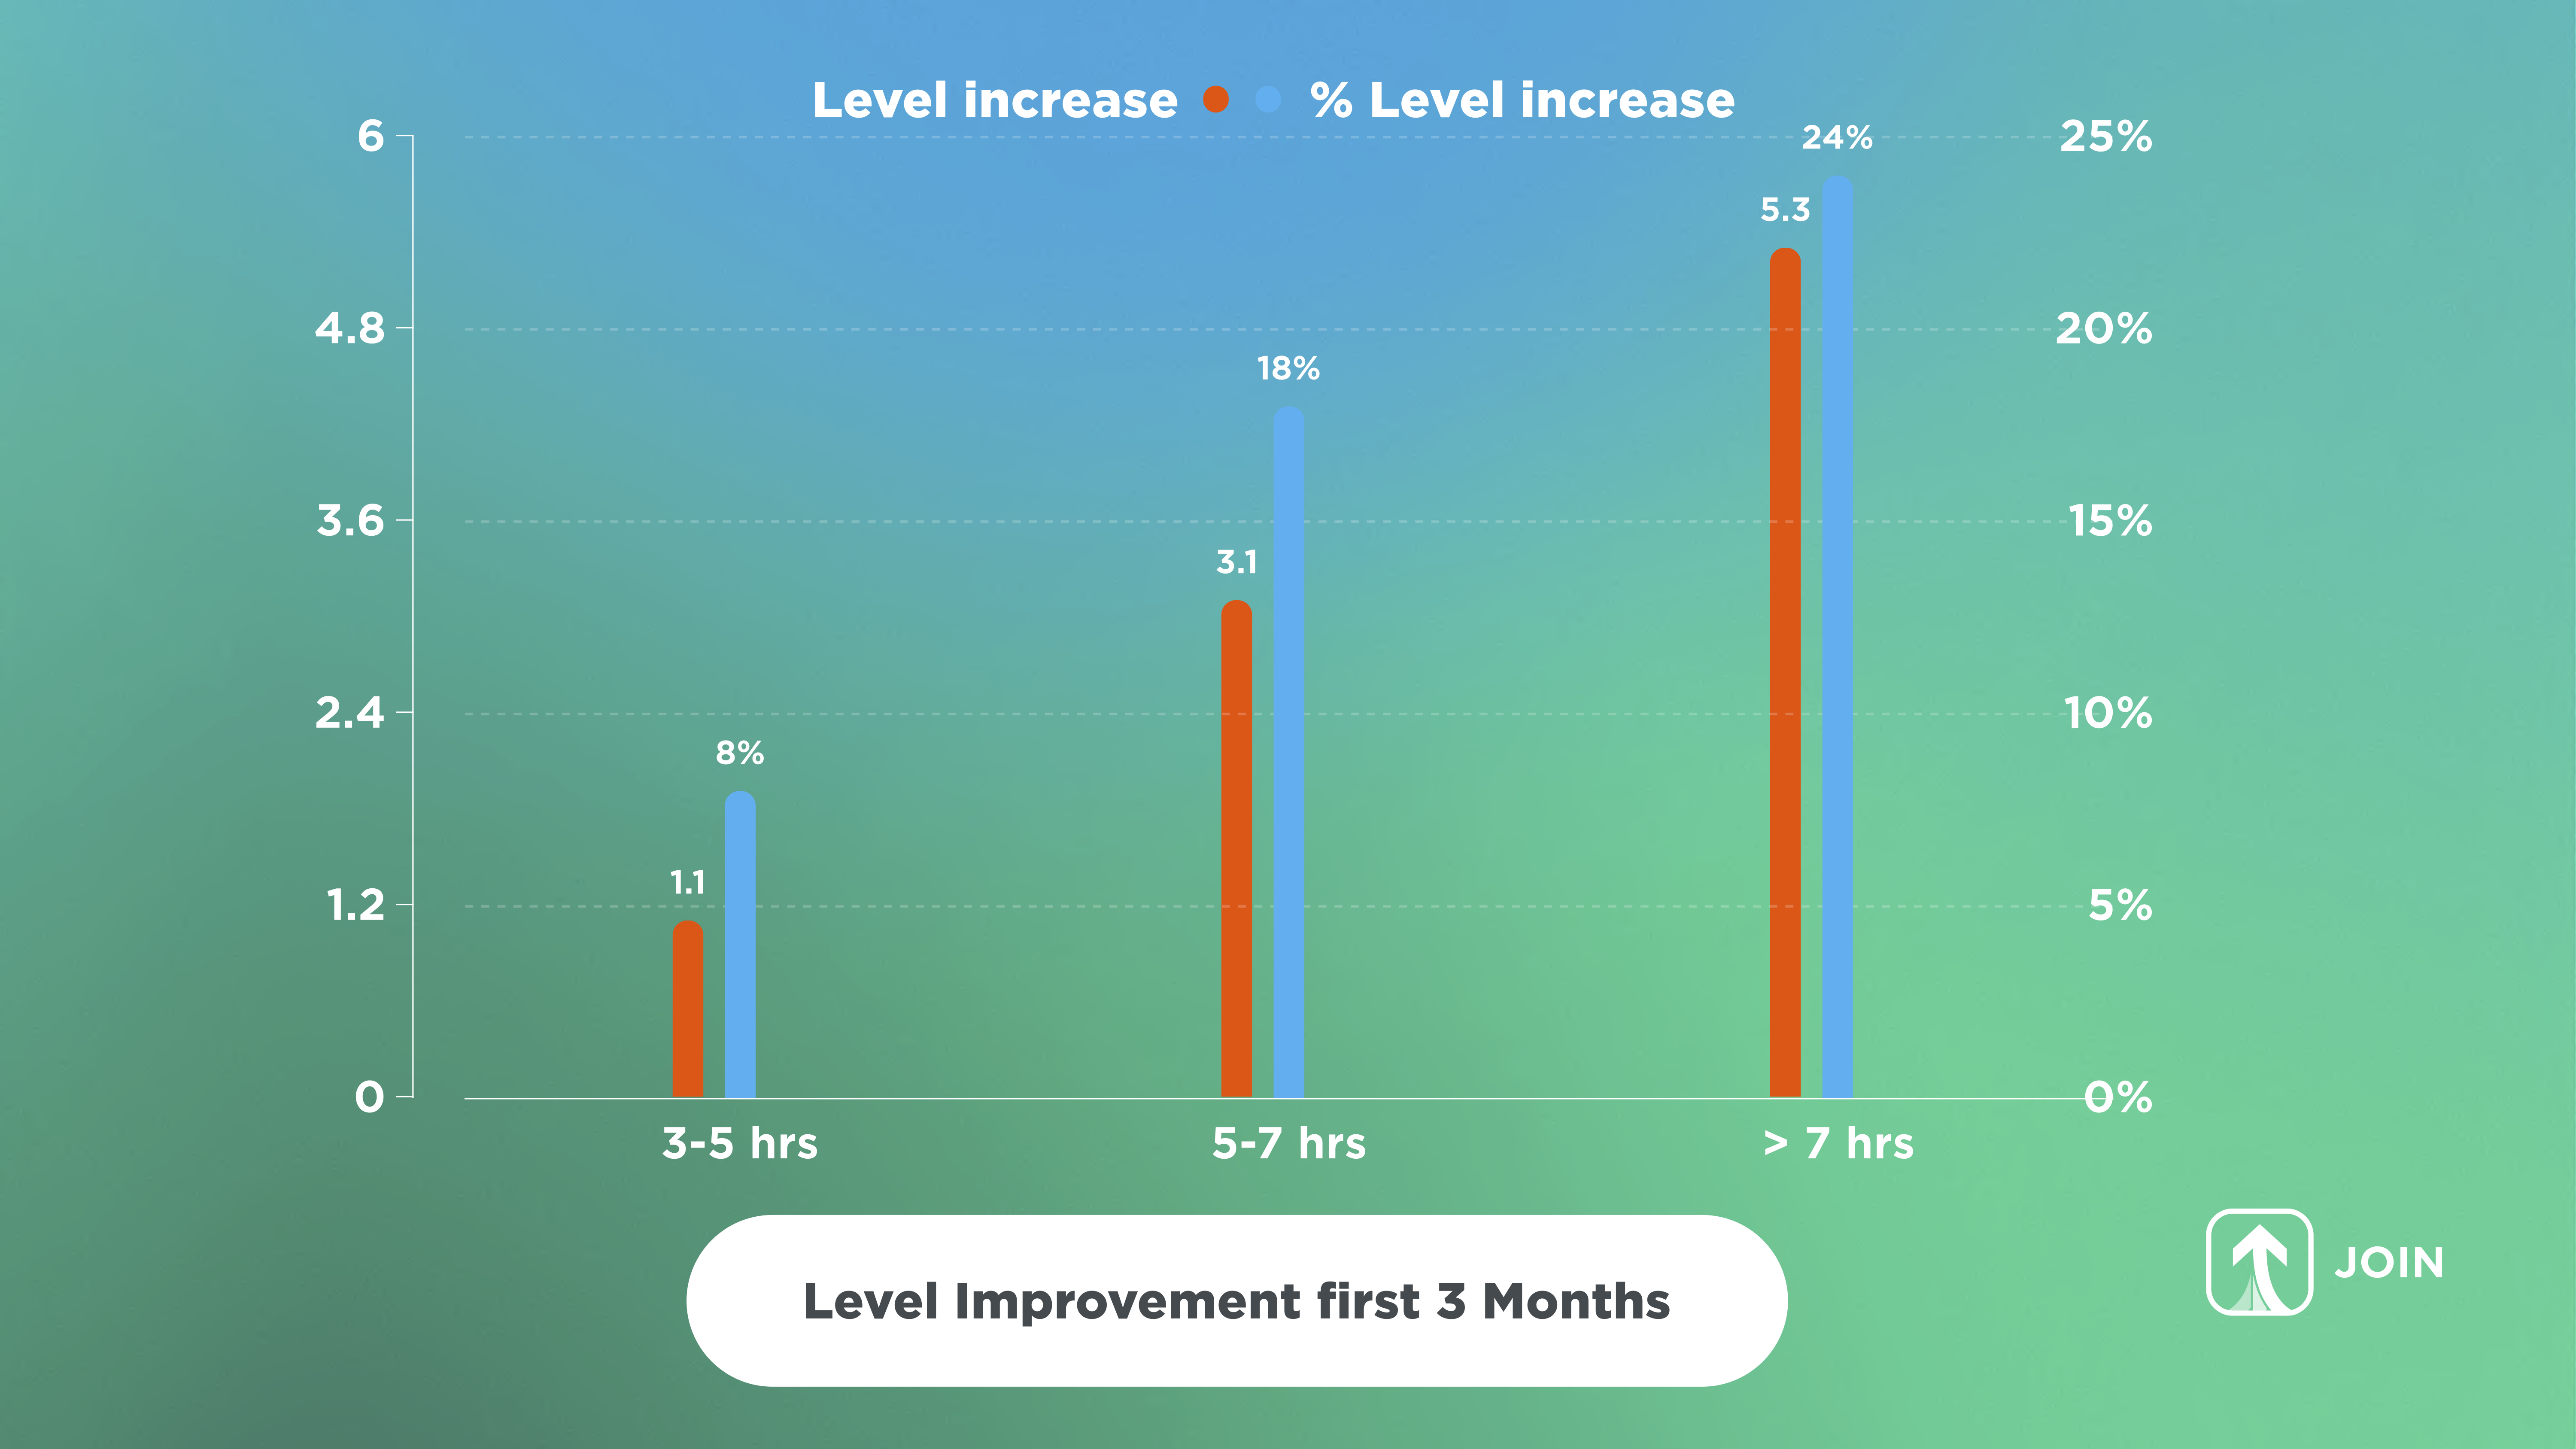 Level improvement first 3 months with JOIN